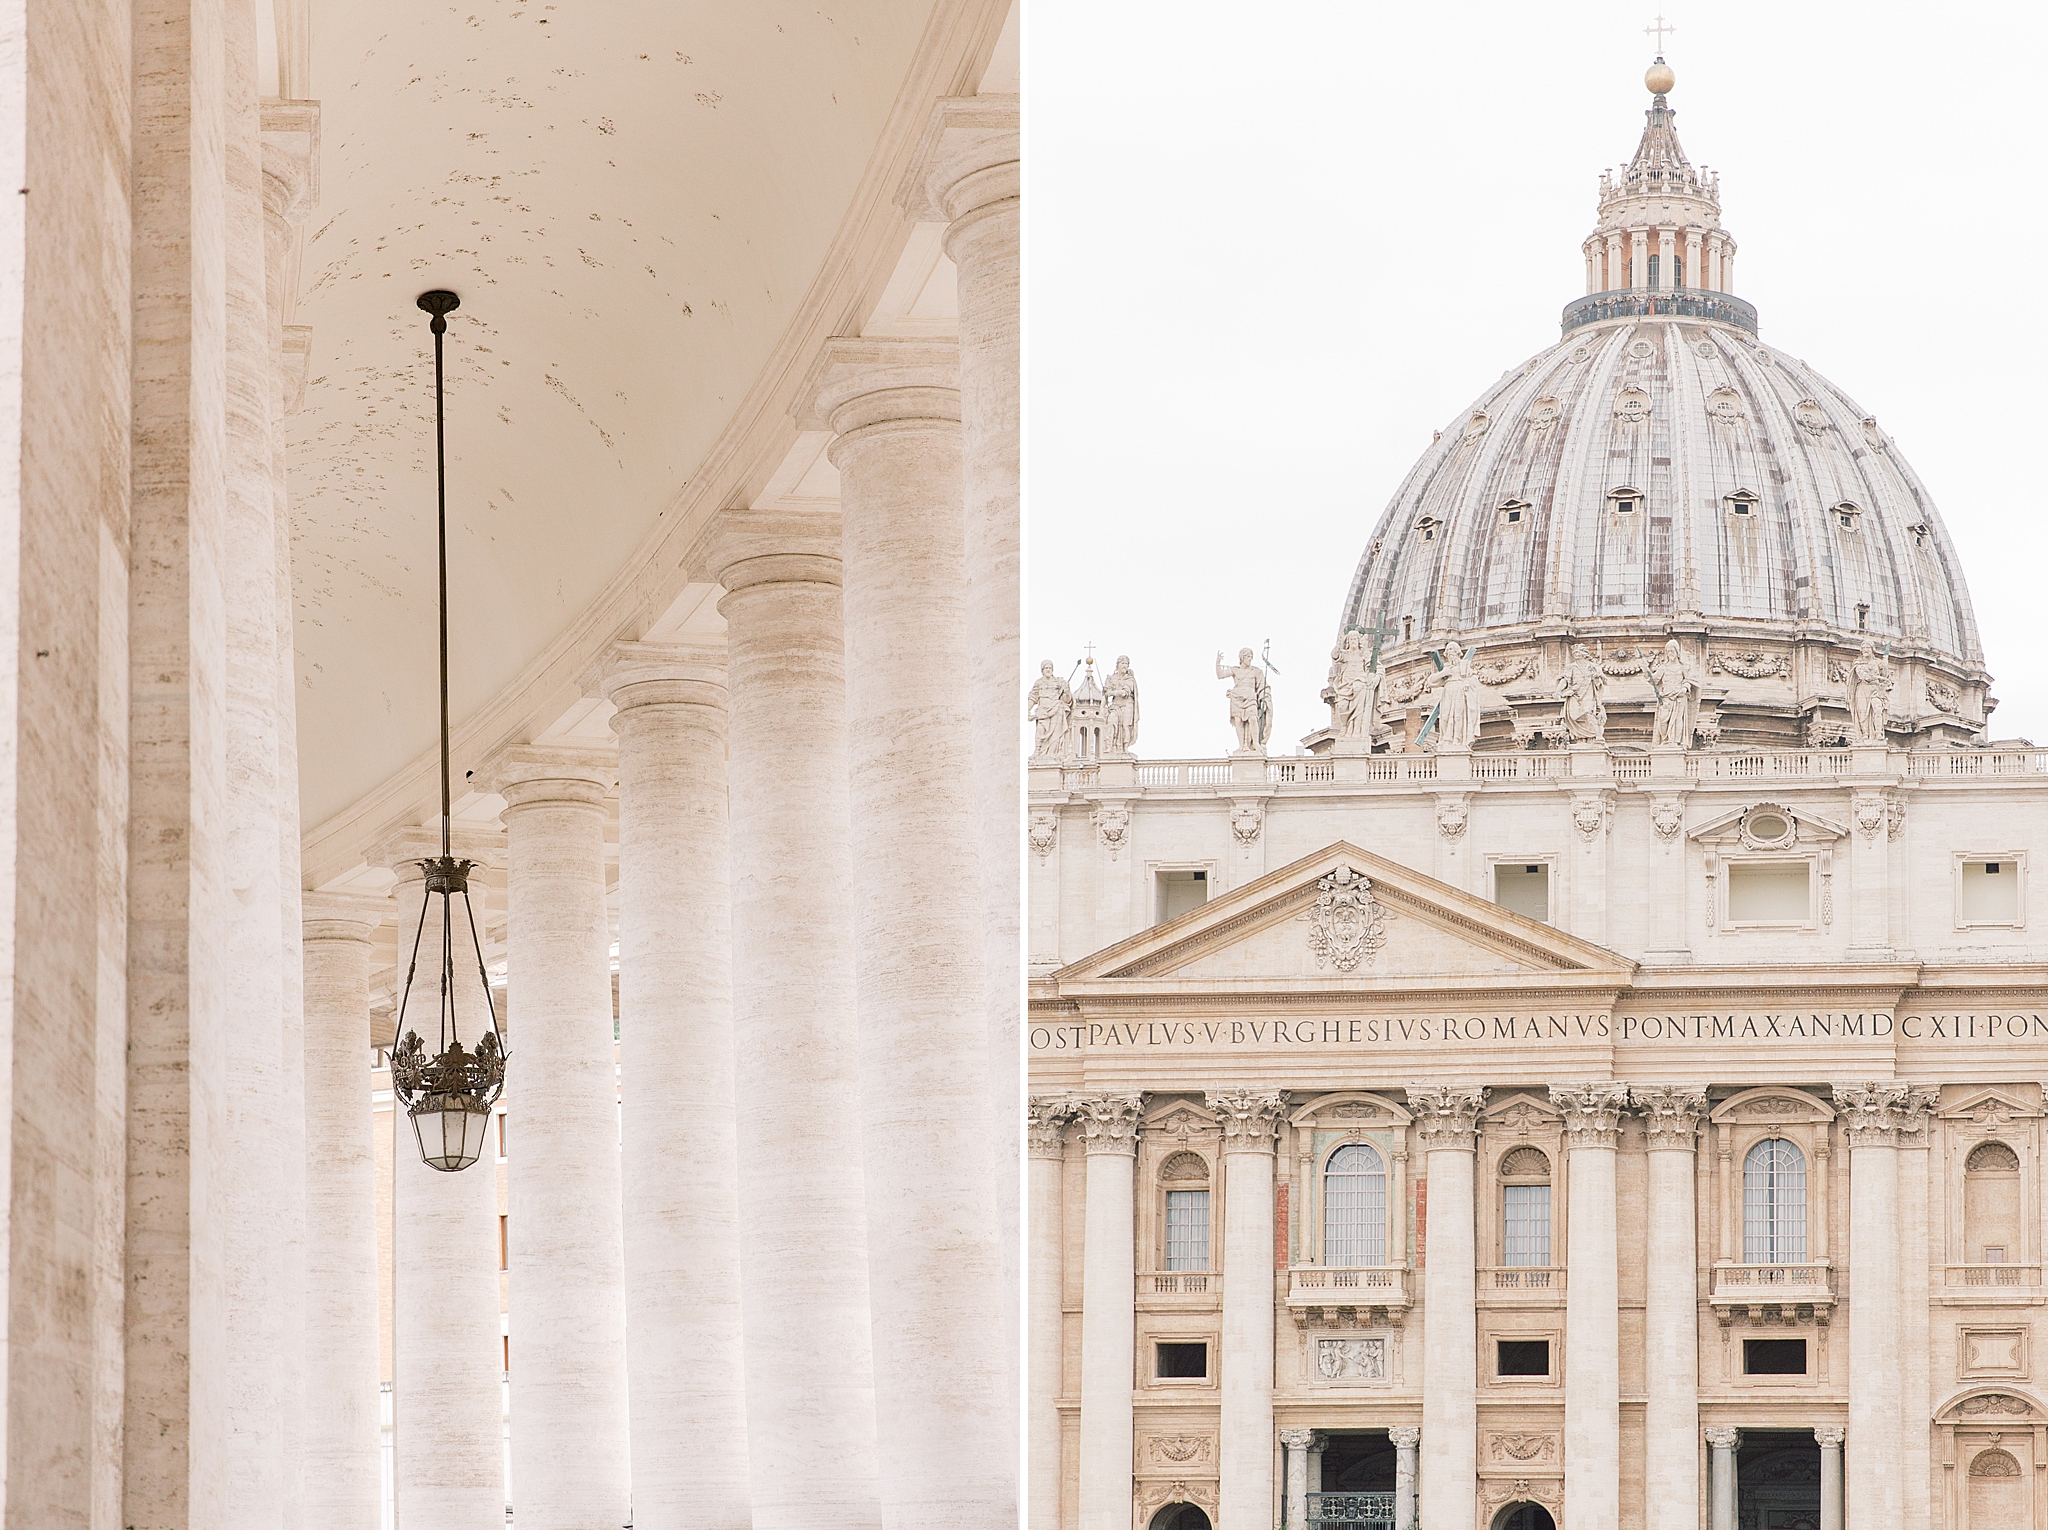 Destination wedding photographer, Alicia Lacey, travels to Rome and explores many famous sites as well as some that off the beaten path.